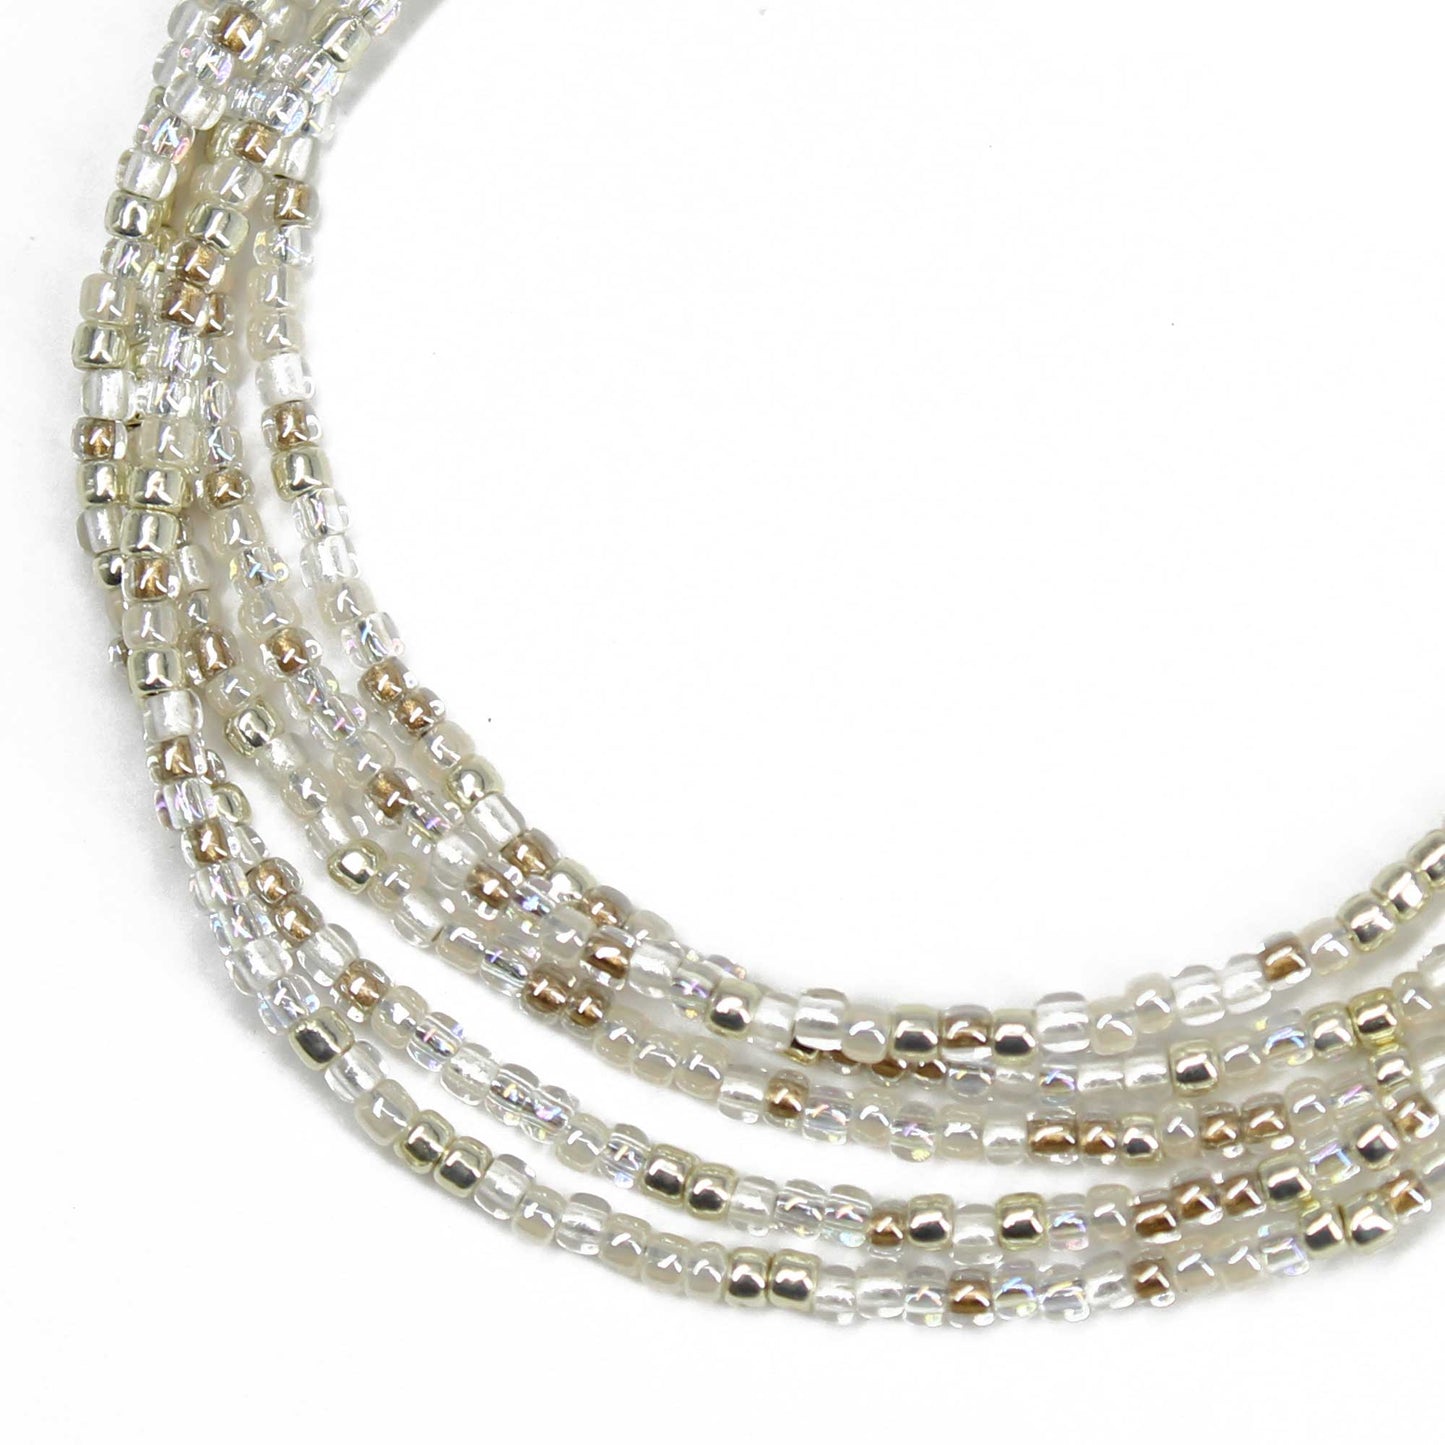 Gold Silver White Seed Bead Necklace, Thin 1.5mm Single Strand